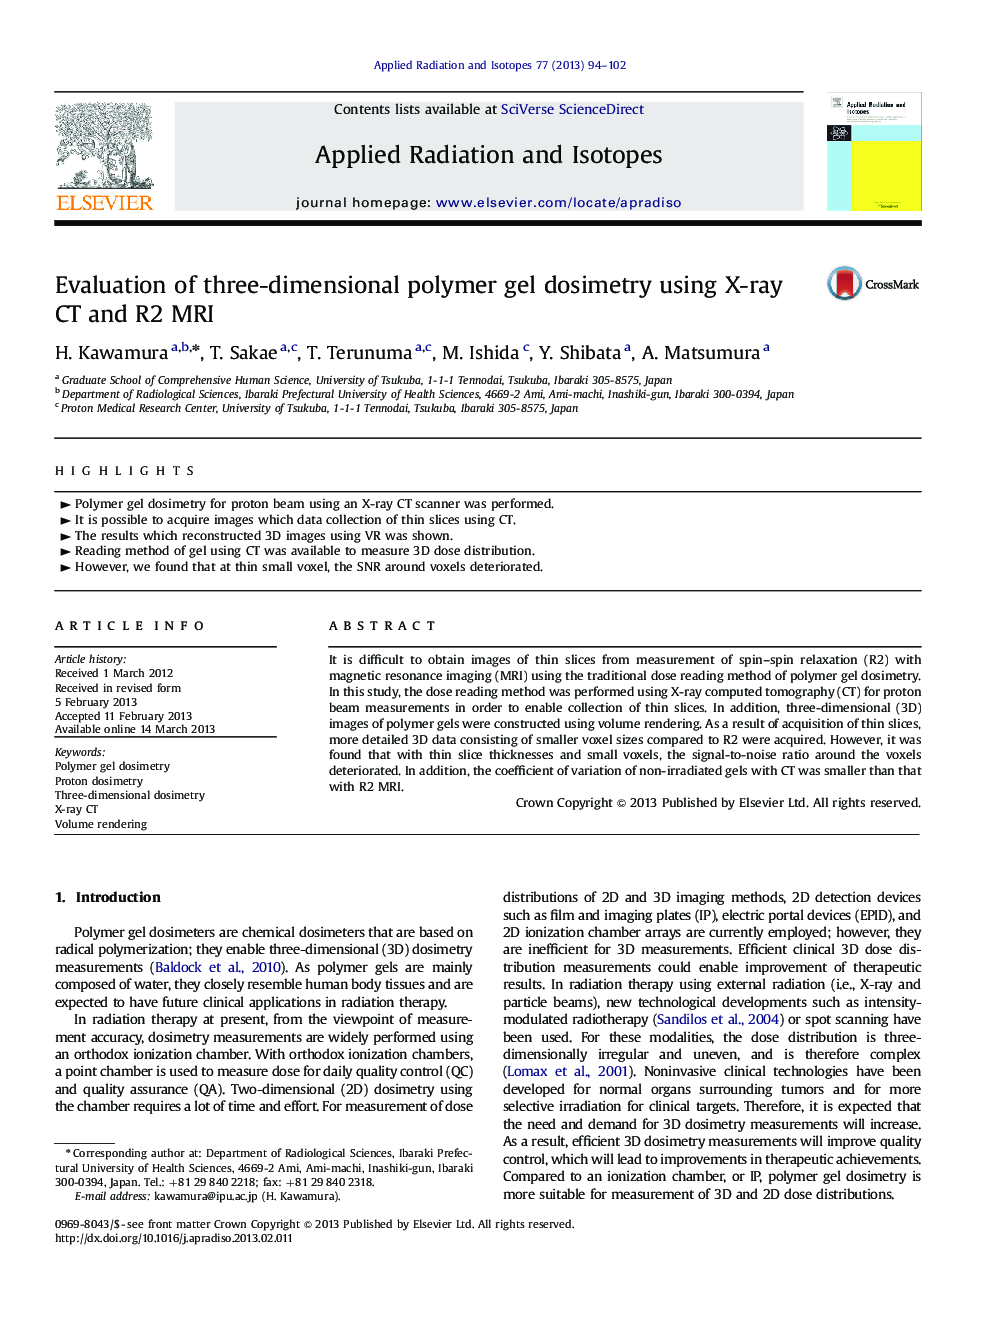 Evaluation of three-dimensional polymer gel dosimetry using X-ray CT and R2 MRI